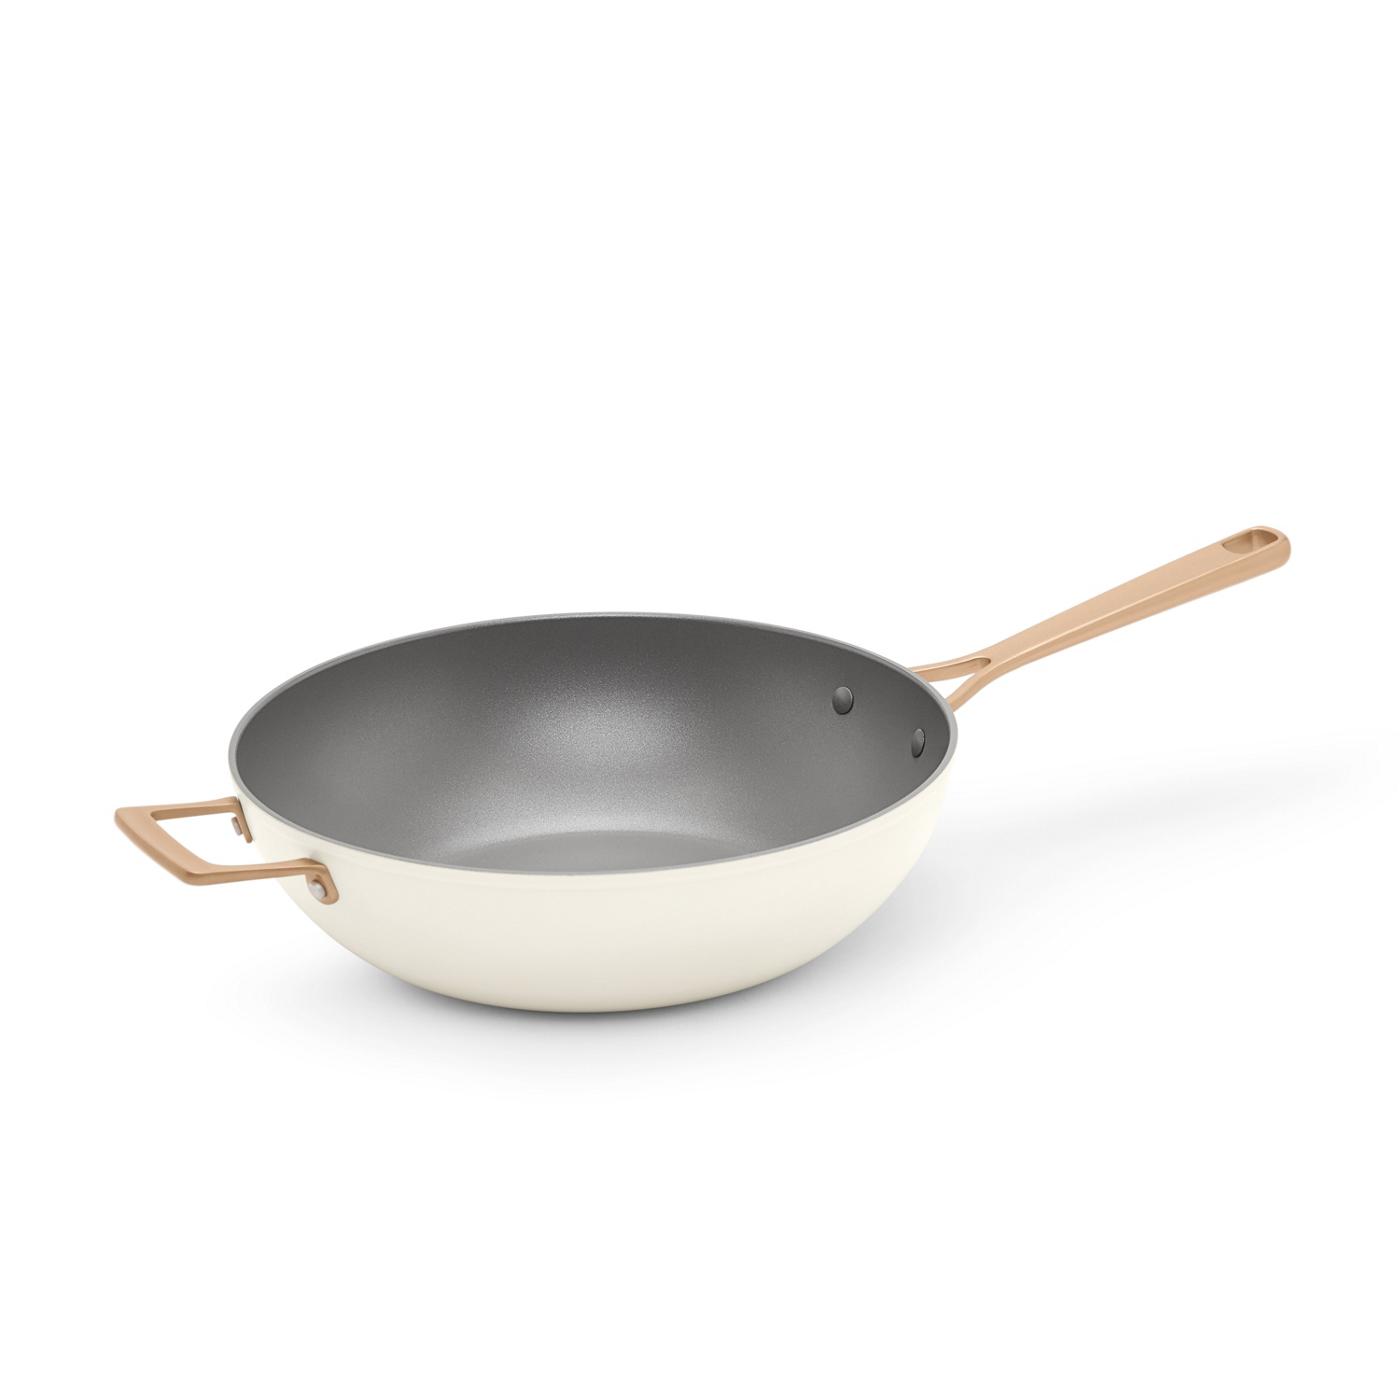 Kitchen & Table by H-E-B Enameled Cast Iron Skillet - Cloud White